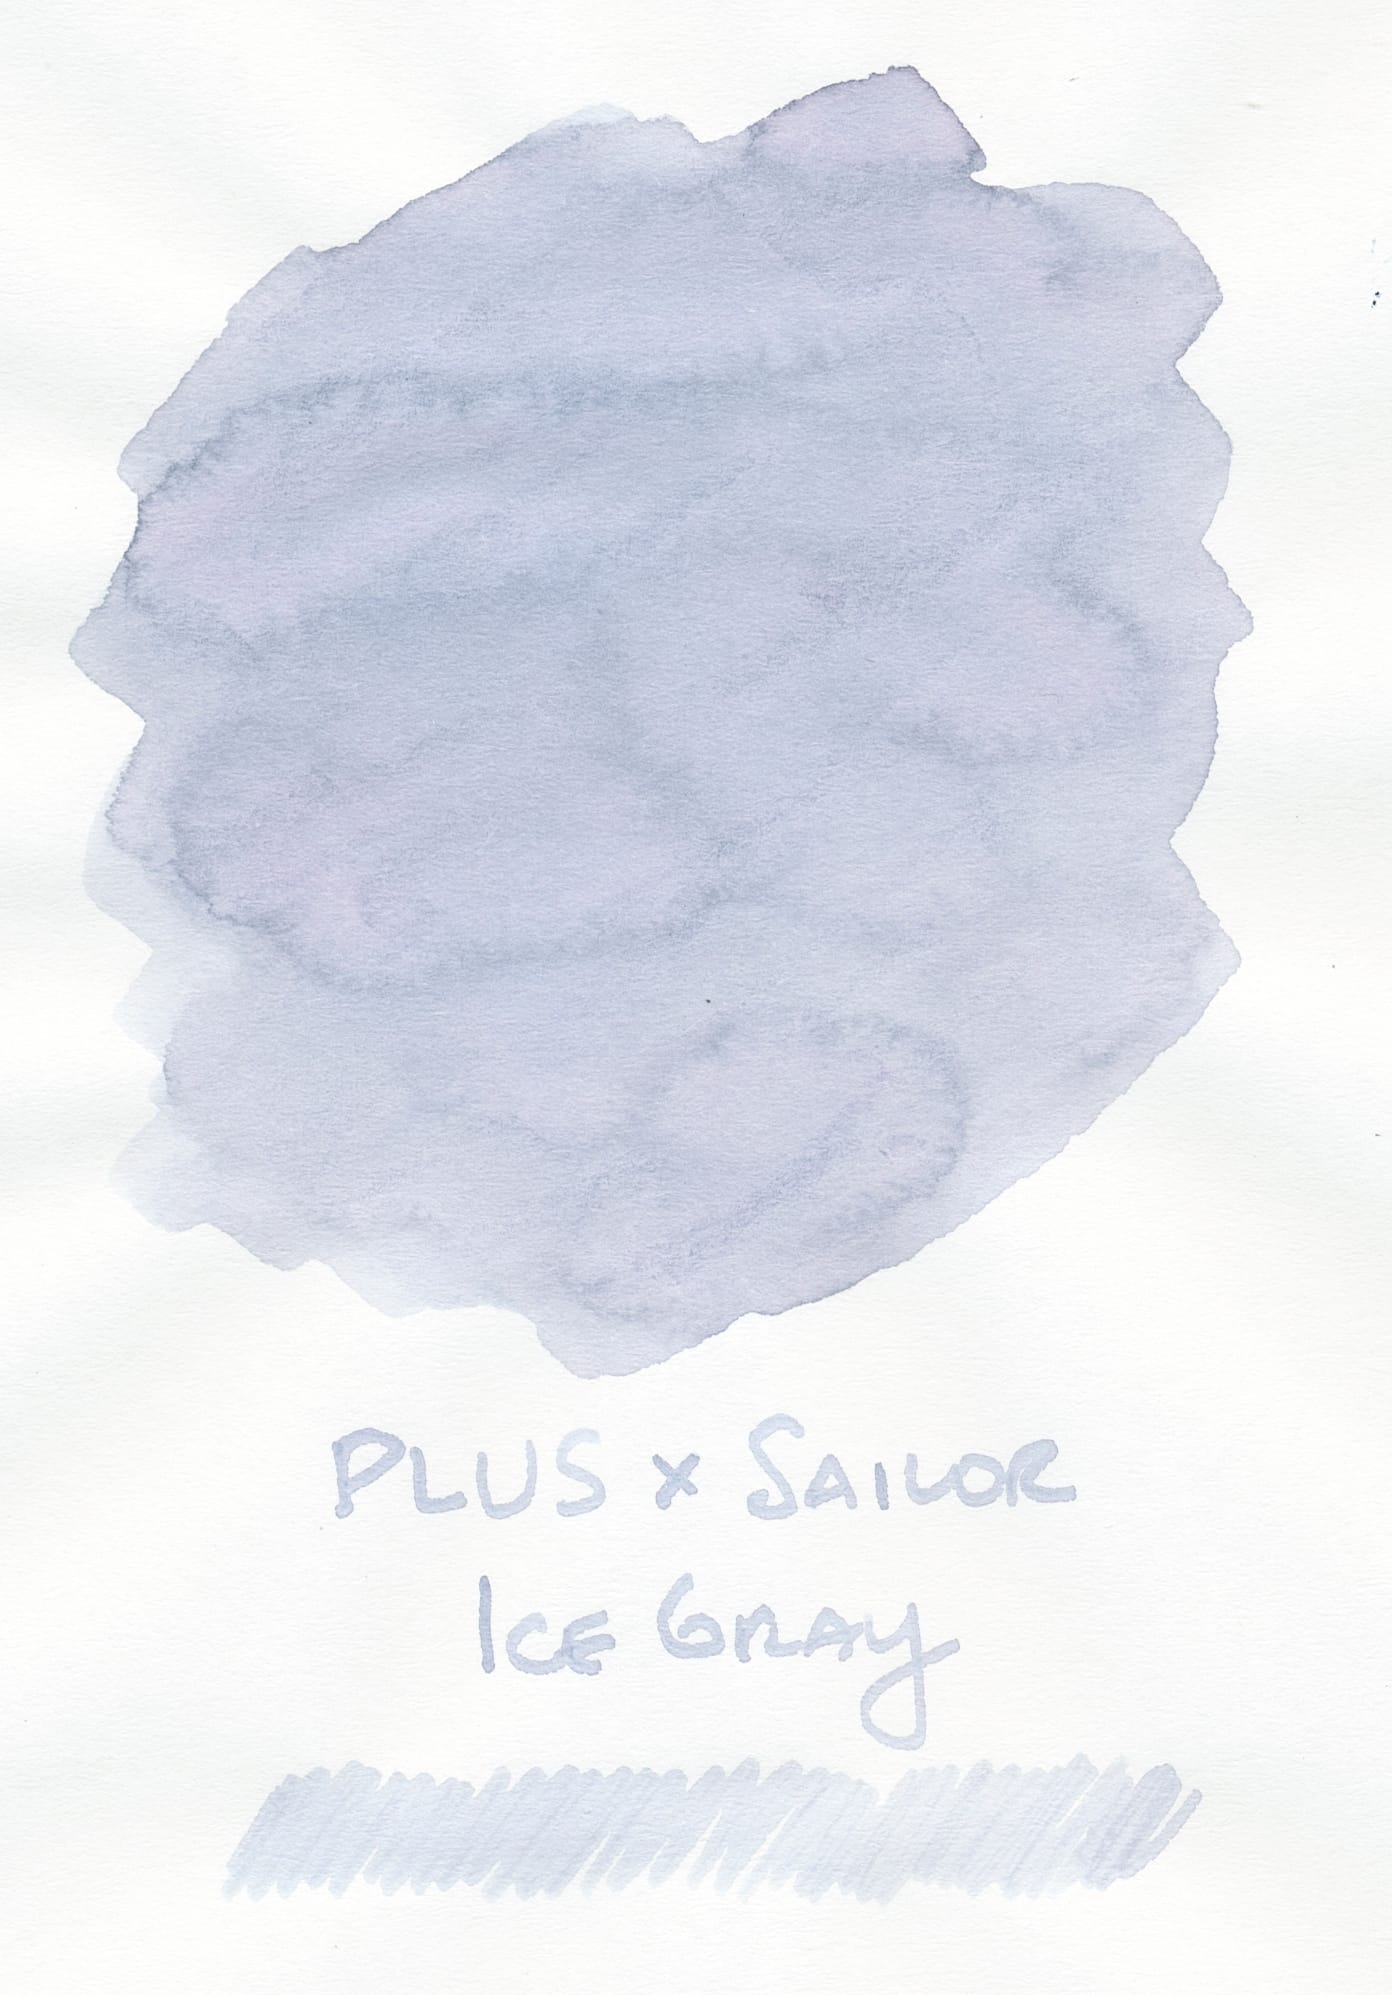 Fountain pen ink swatch on white Tomoe River paper: a cloudy, cool gray color